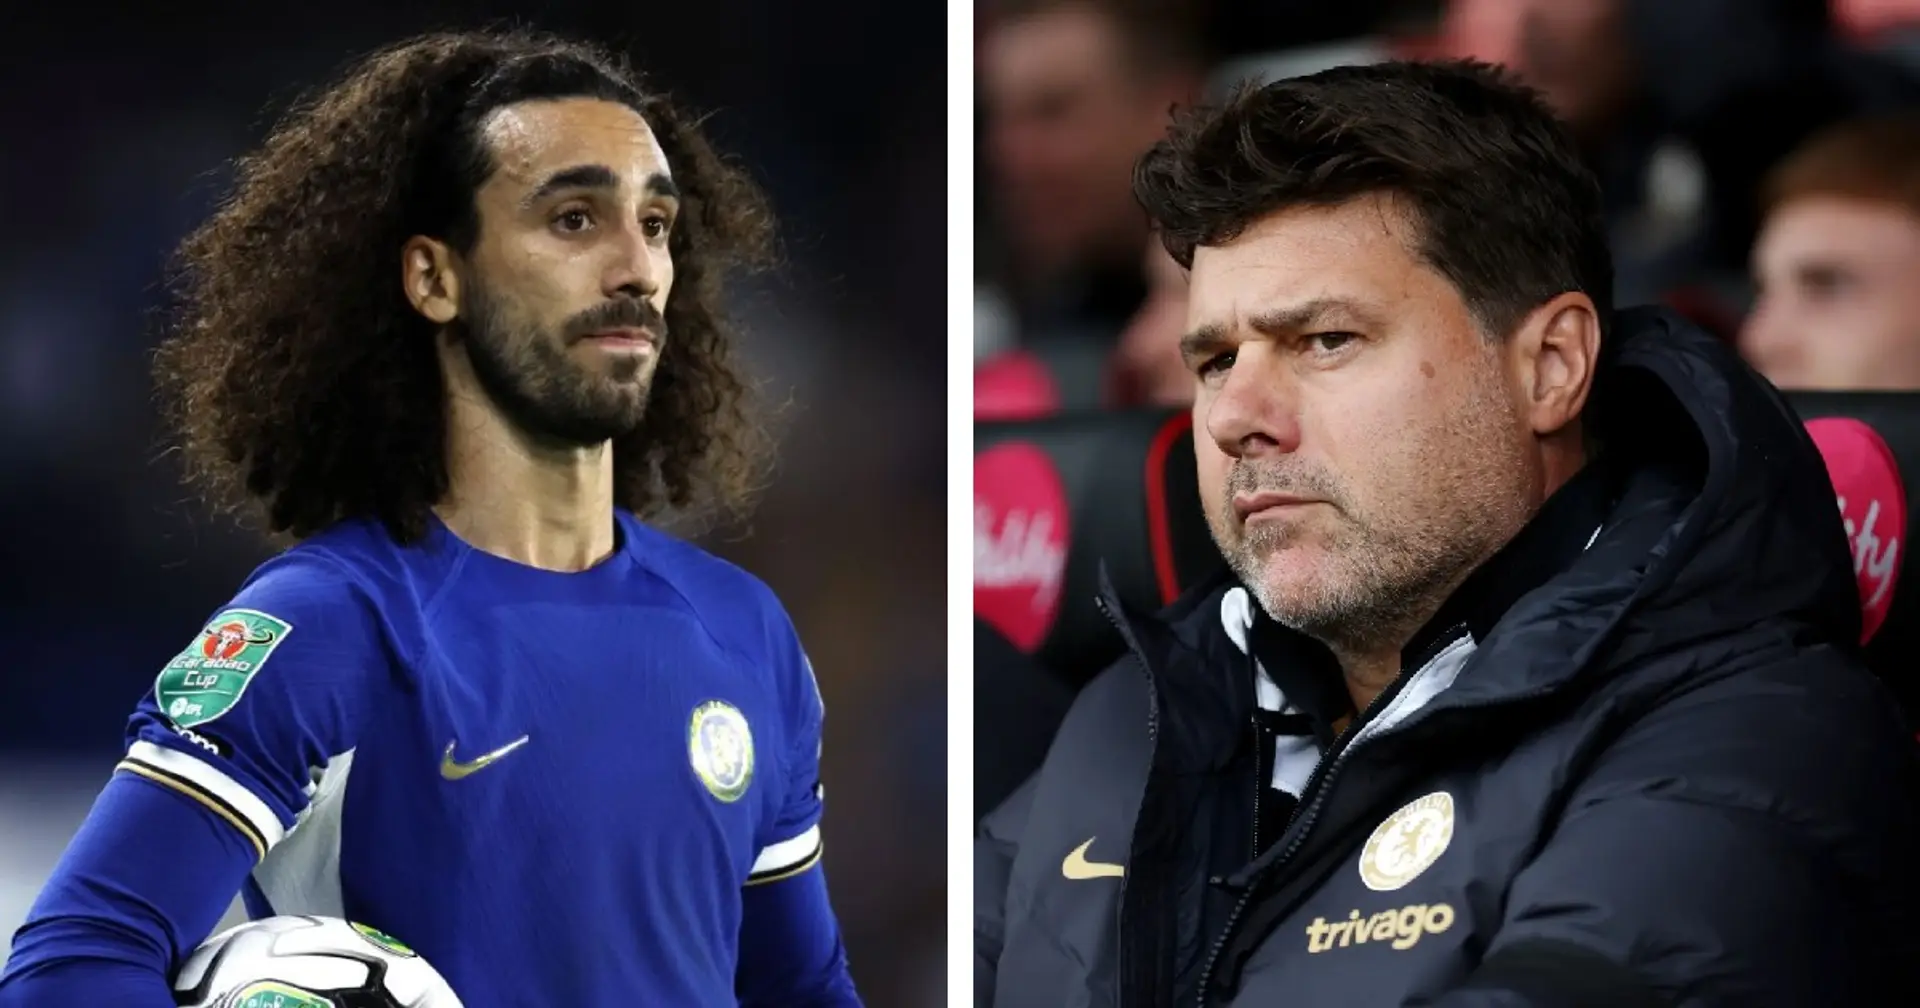 'It was a difficult time for him': Pochettino reveals Cucurella talks after Man United move collapsed due to Cup appearance